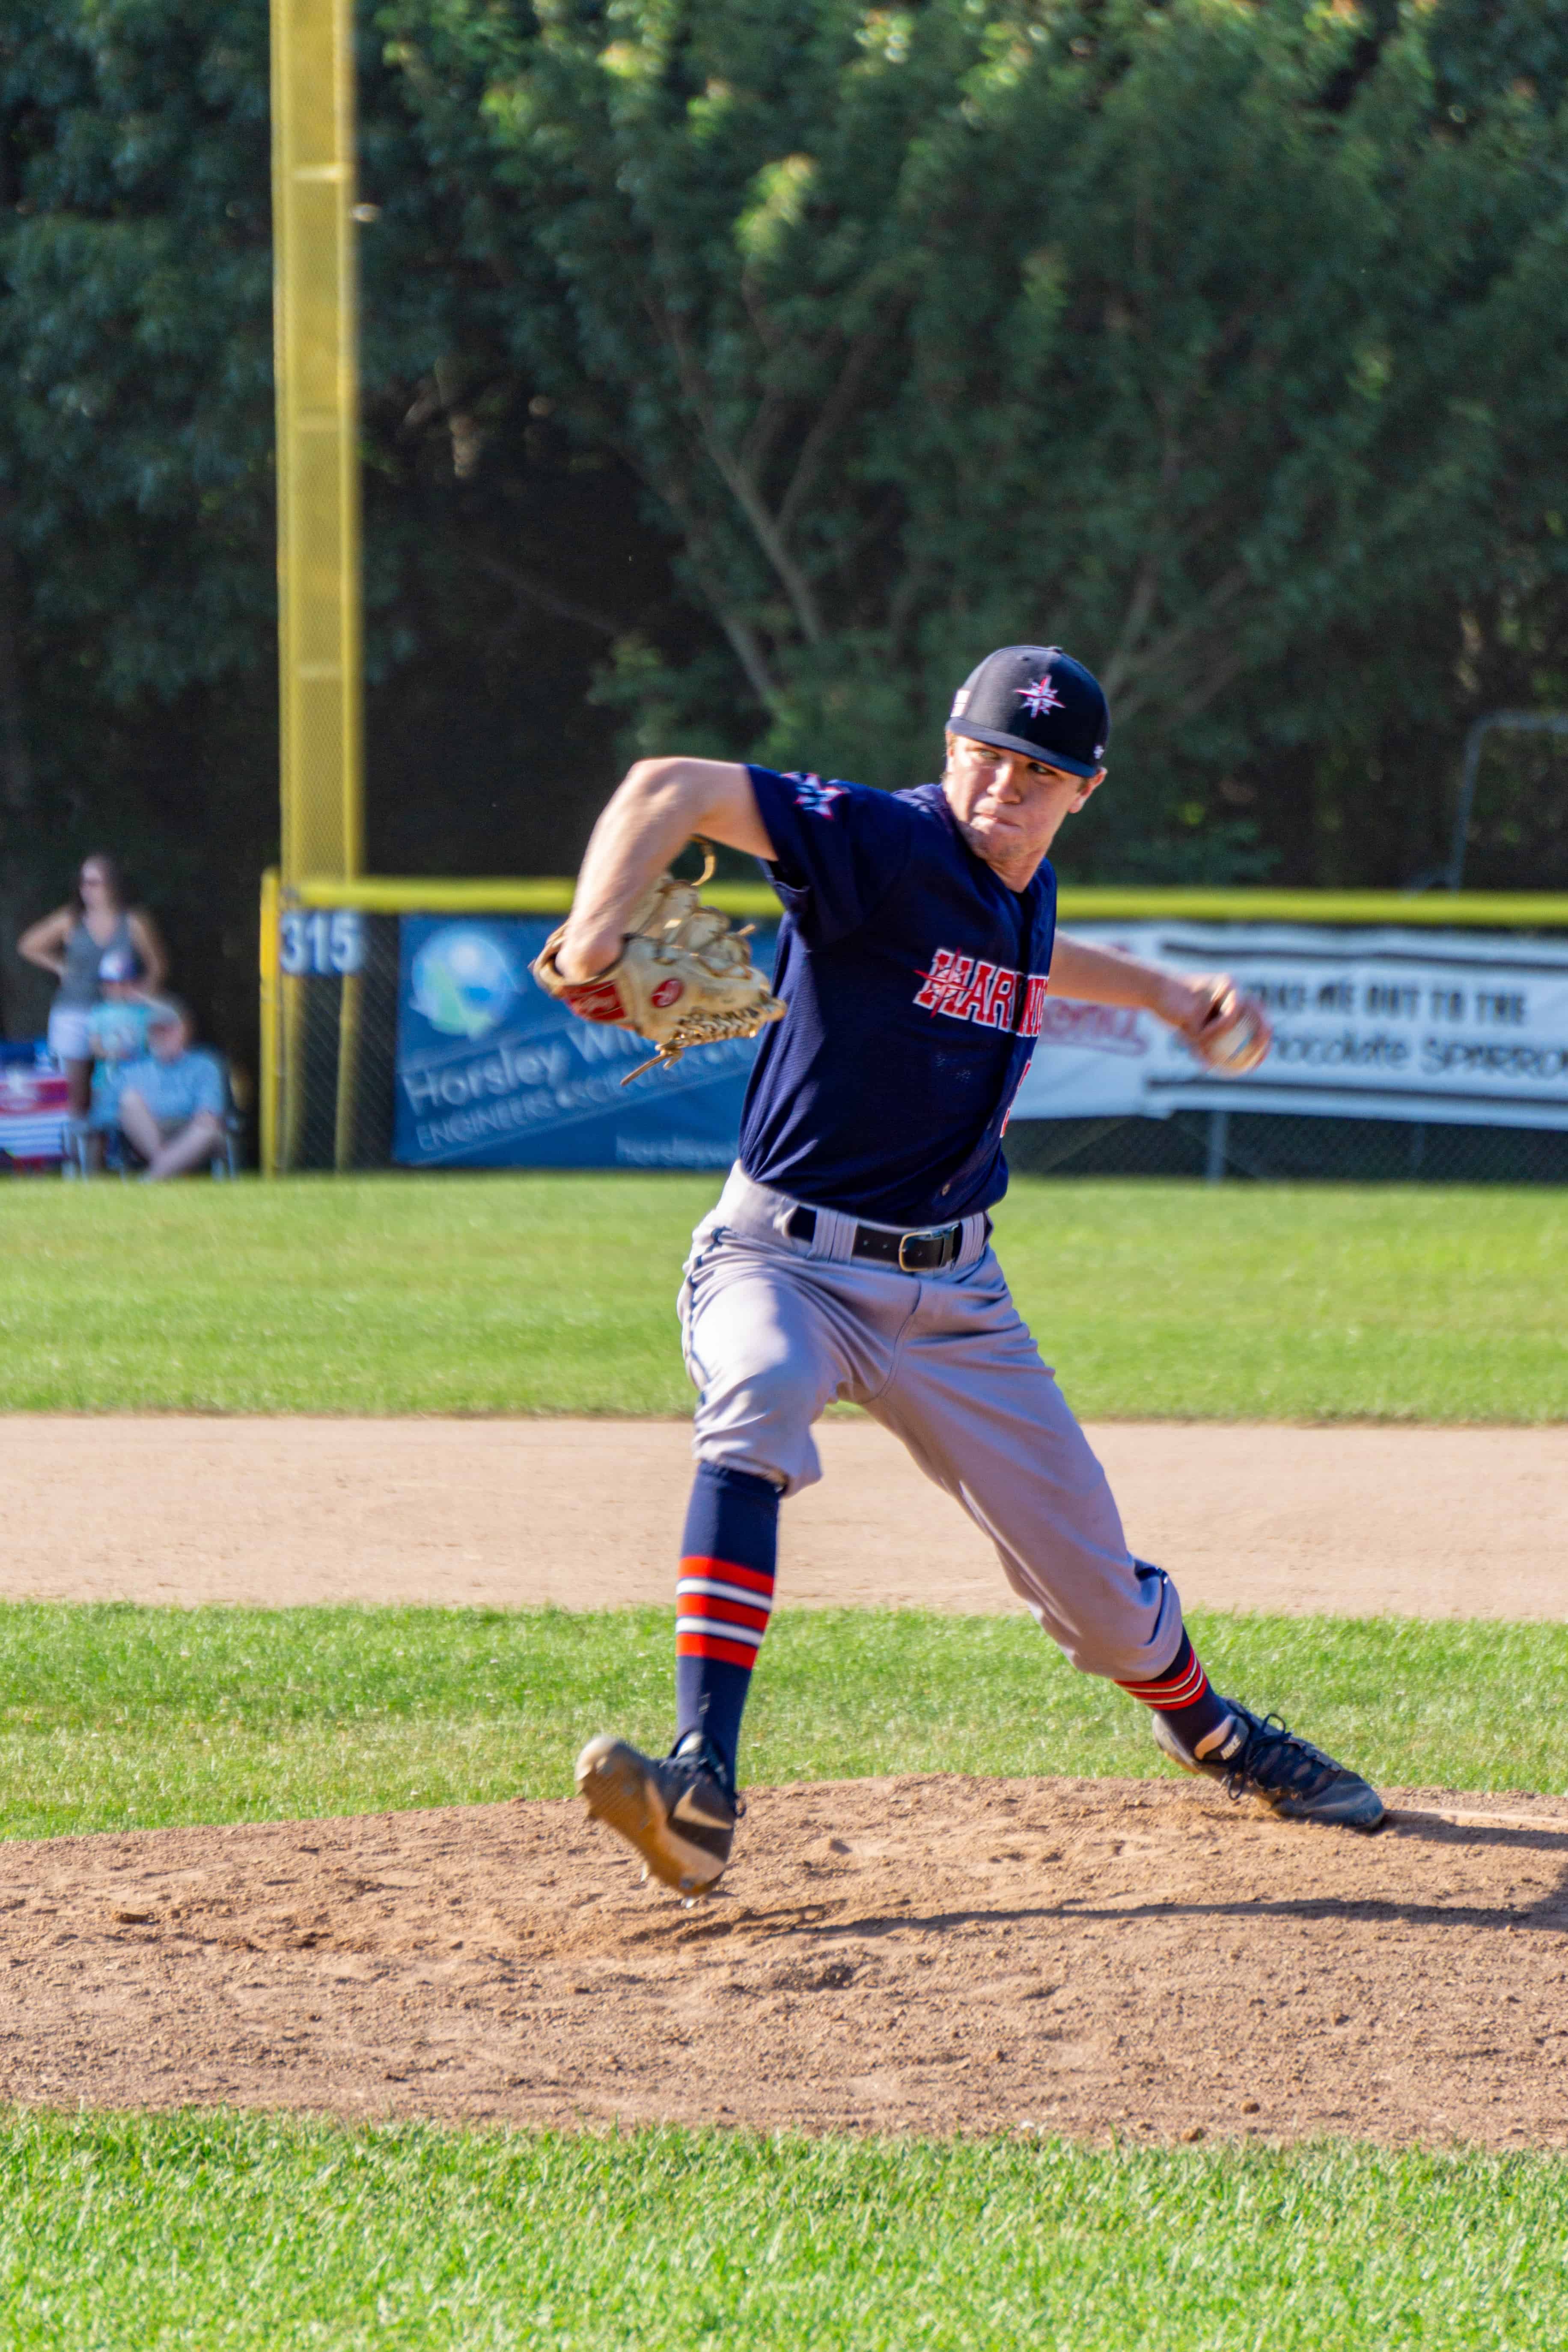 Best things to do in Cape Cod Massachusetts Cape League baseball